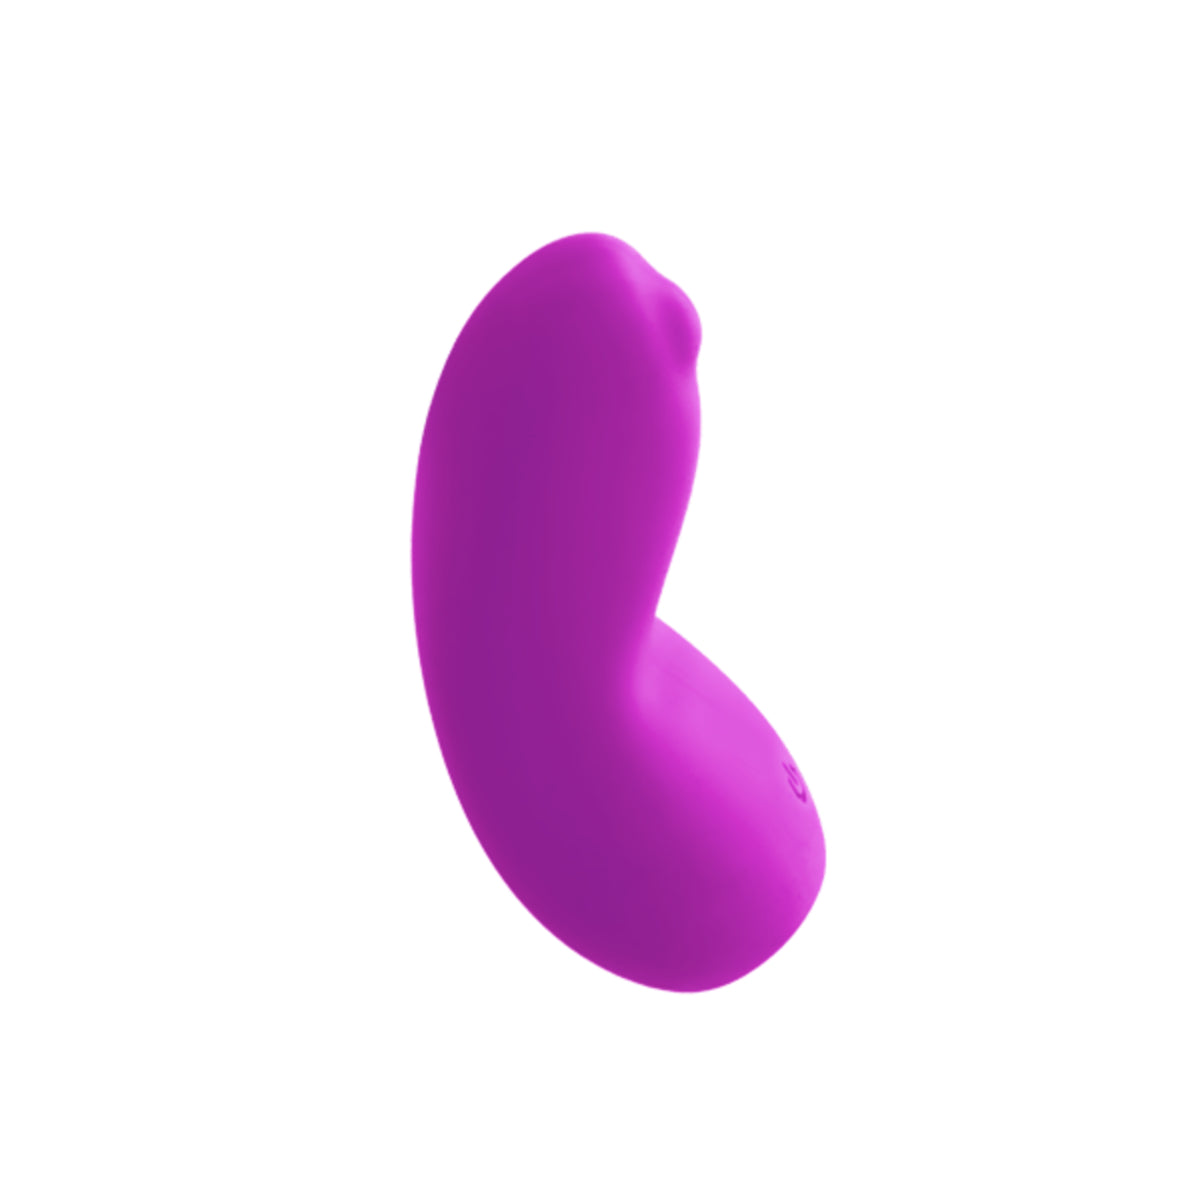 IZZY is ideal for clitoris, nipples, penis, perineum - any body spot craving some attention!